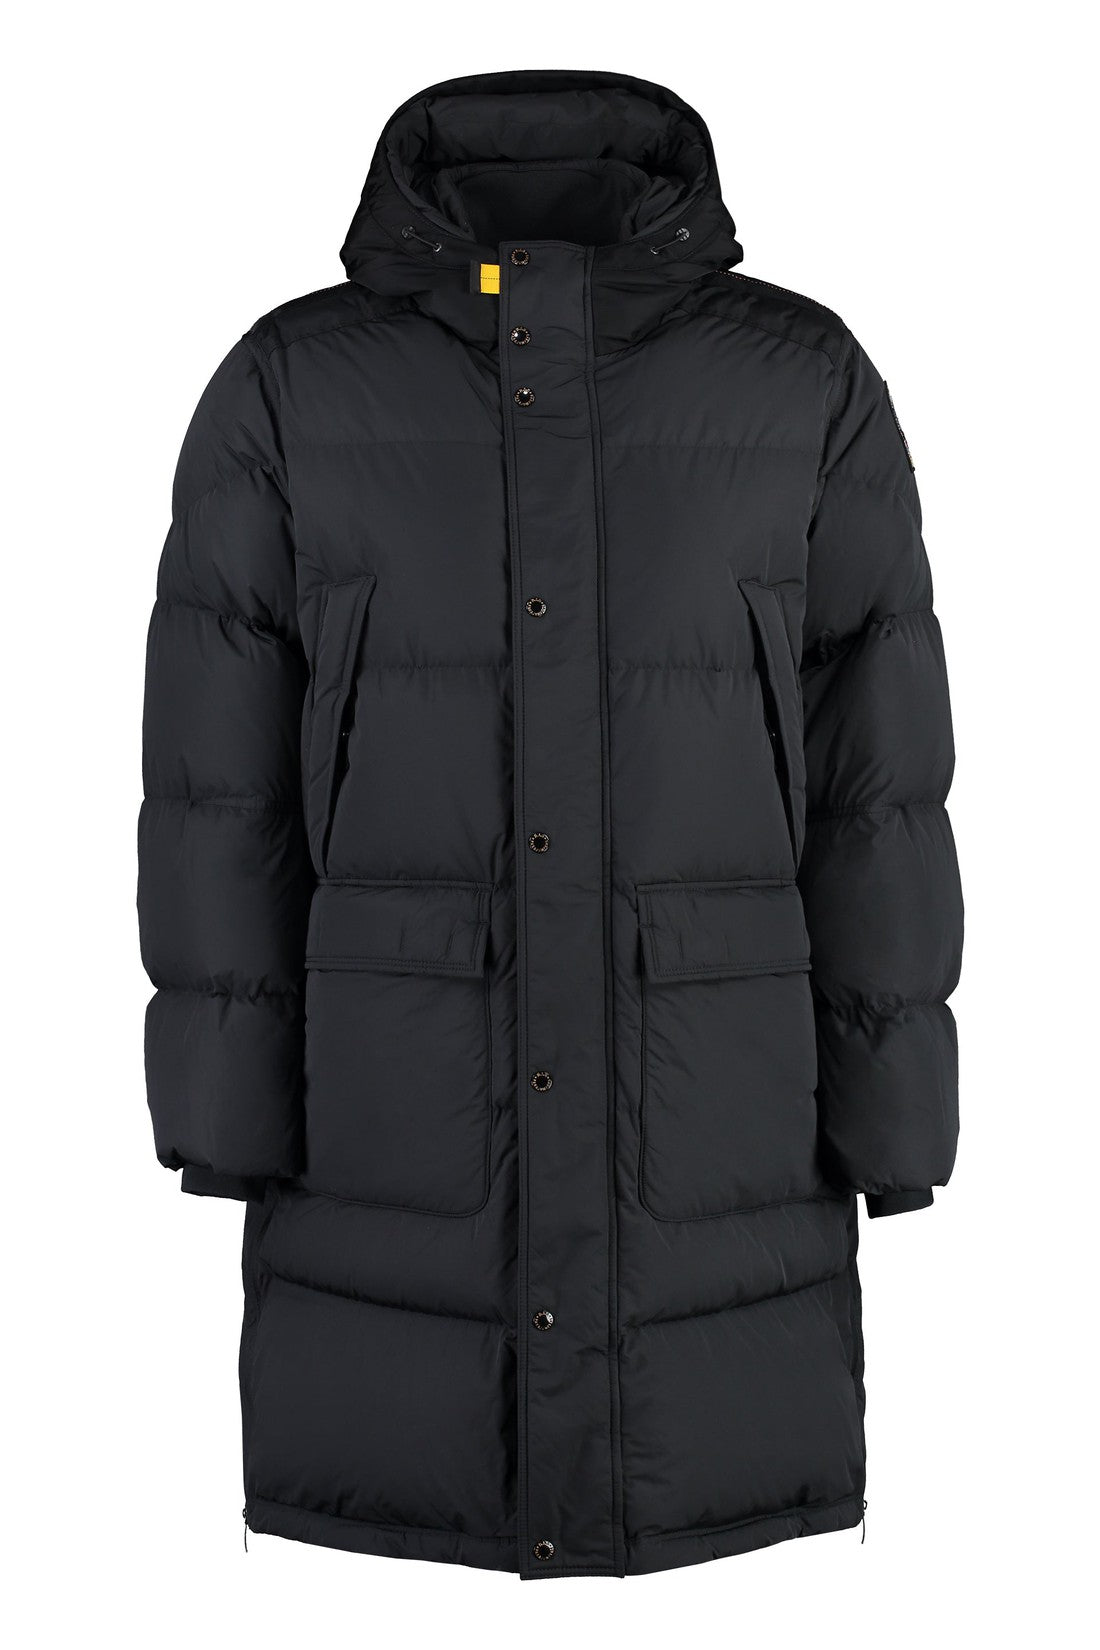 Parajumpers-OUTLET-SALE-Long Bear long hooded down jacket-ARCHIVIST